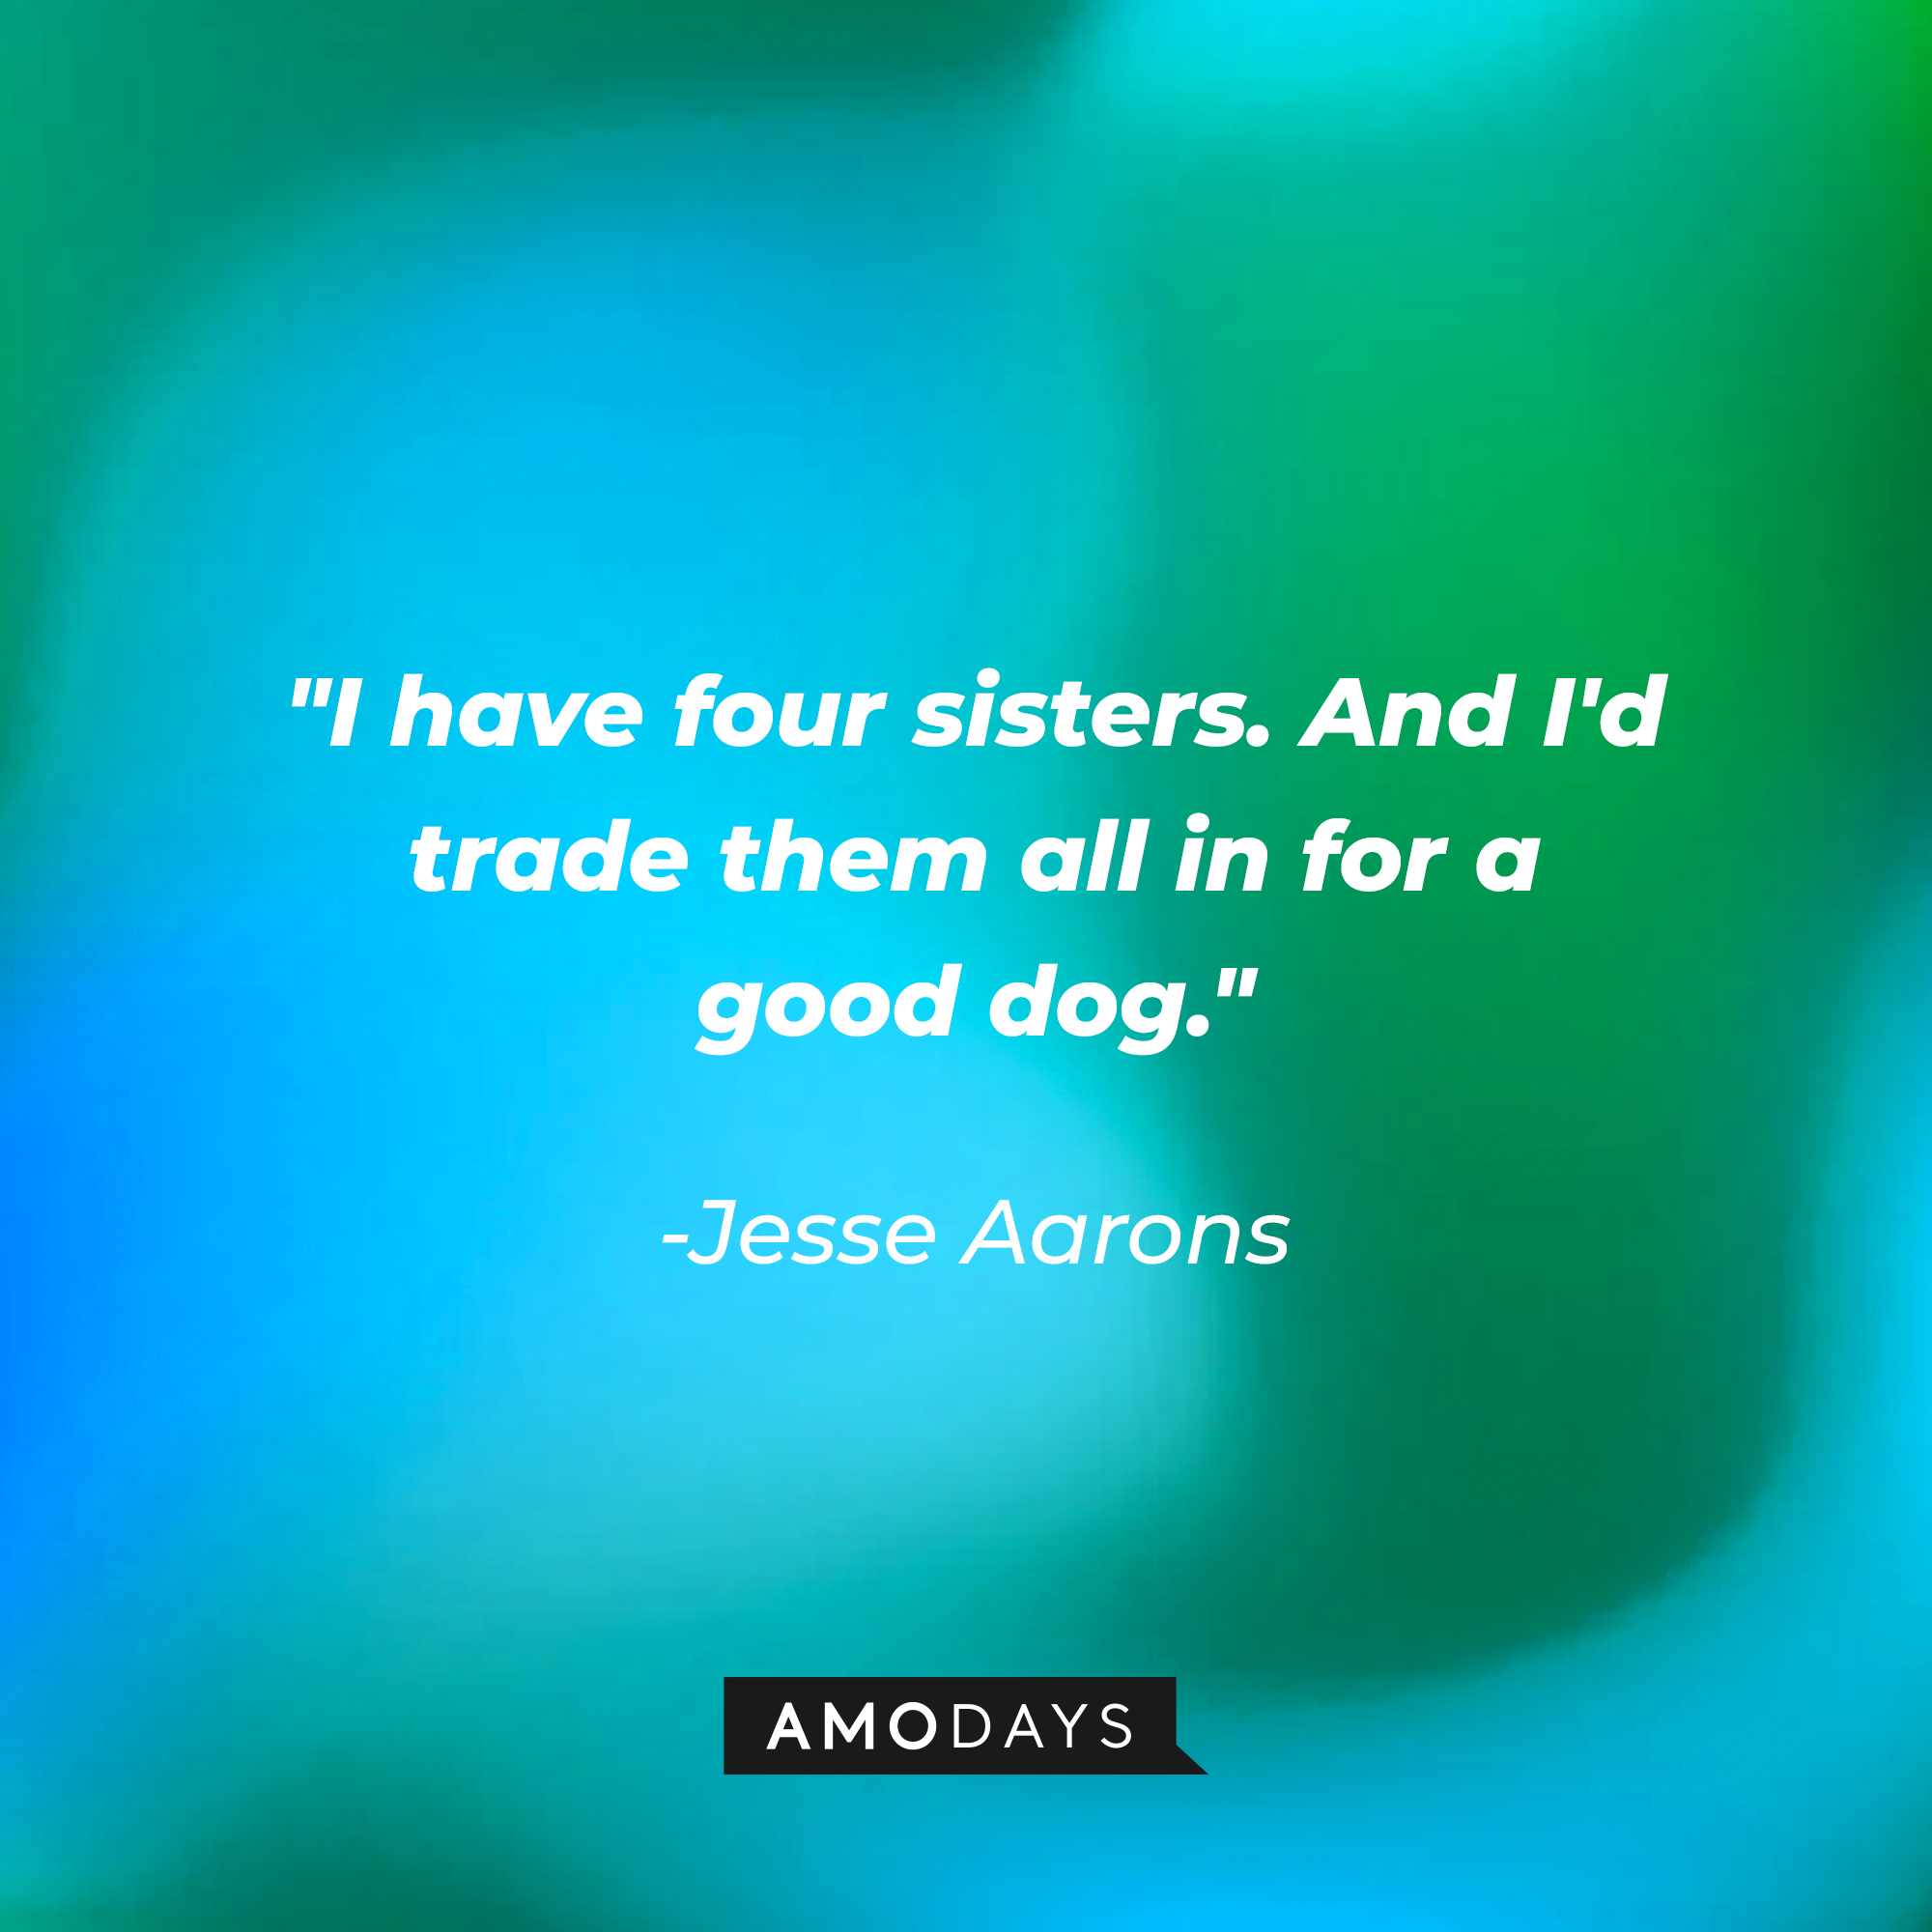 Jesse Aarons' quote: "I have four sisters. And I'd trade them all in for a good dog." | Source: Amodays